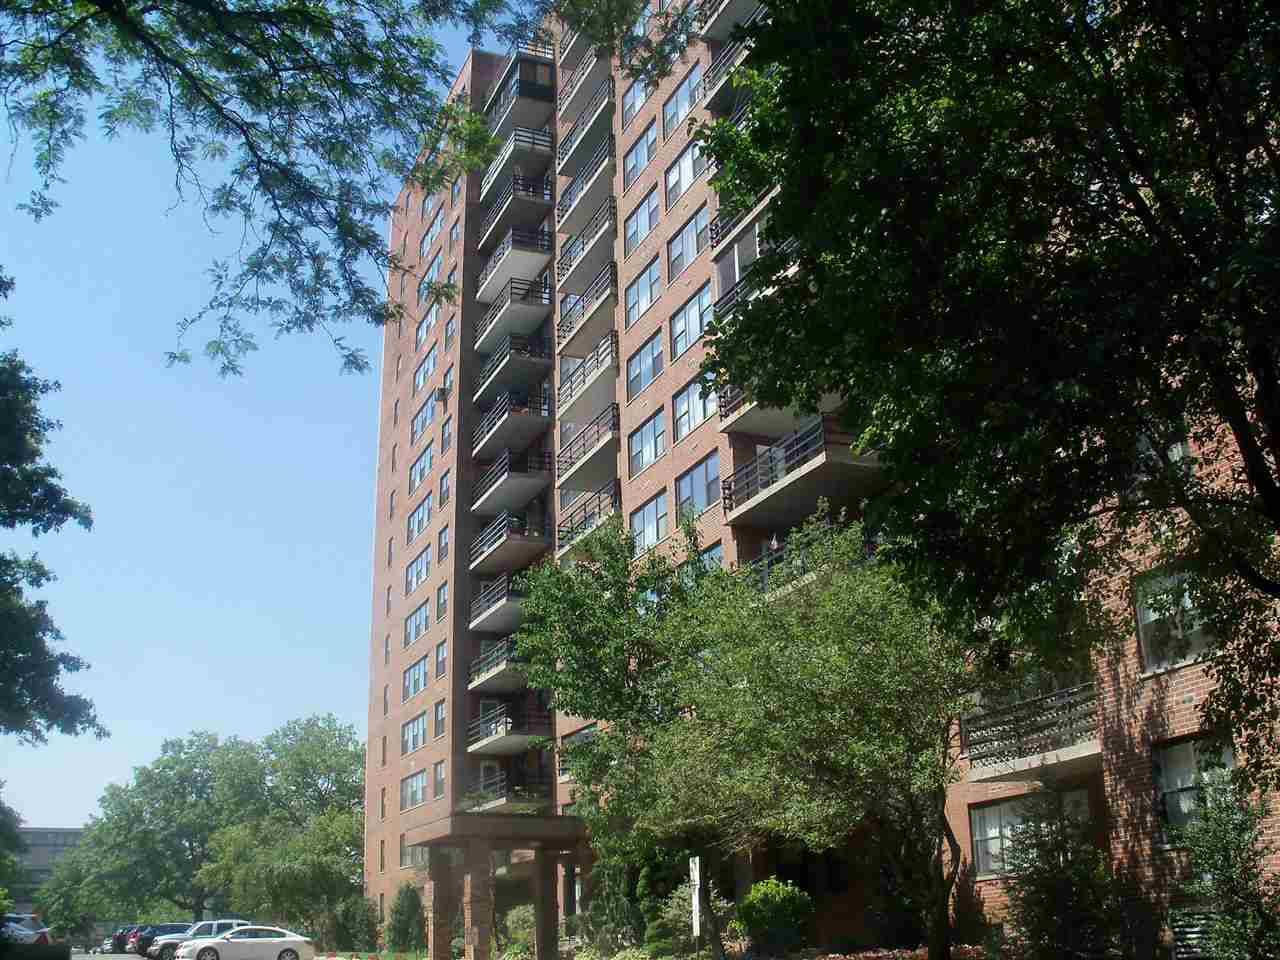 Large one bedroom condominium unit with terrace - 1 BR Condo Journal Square New Jersey